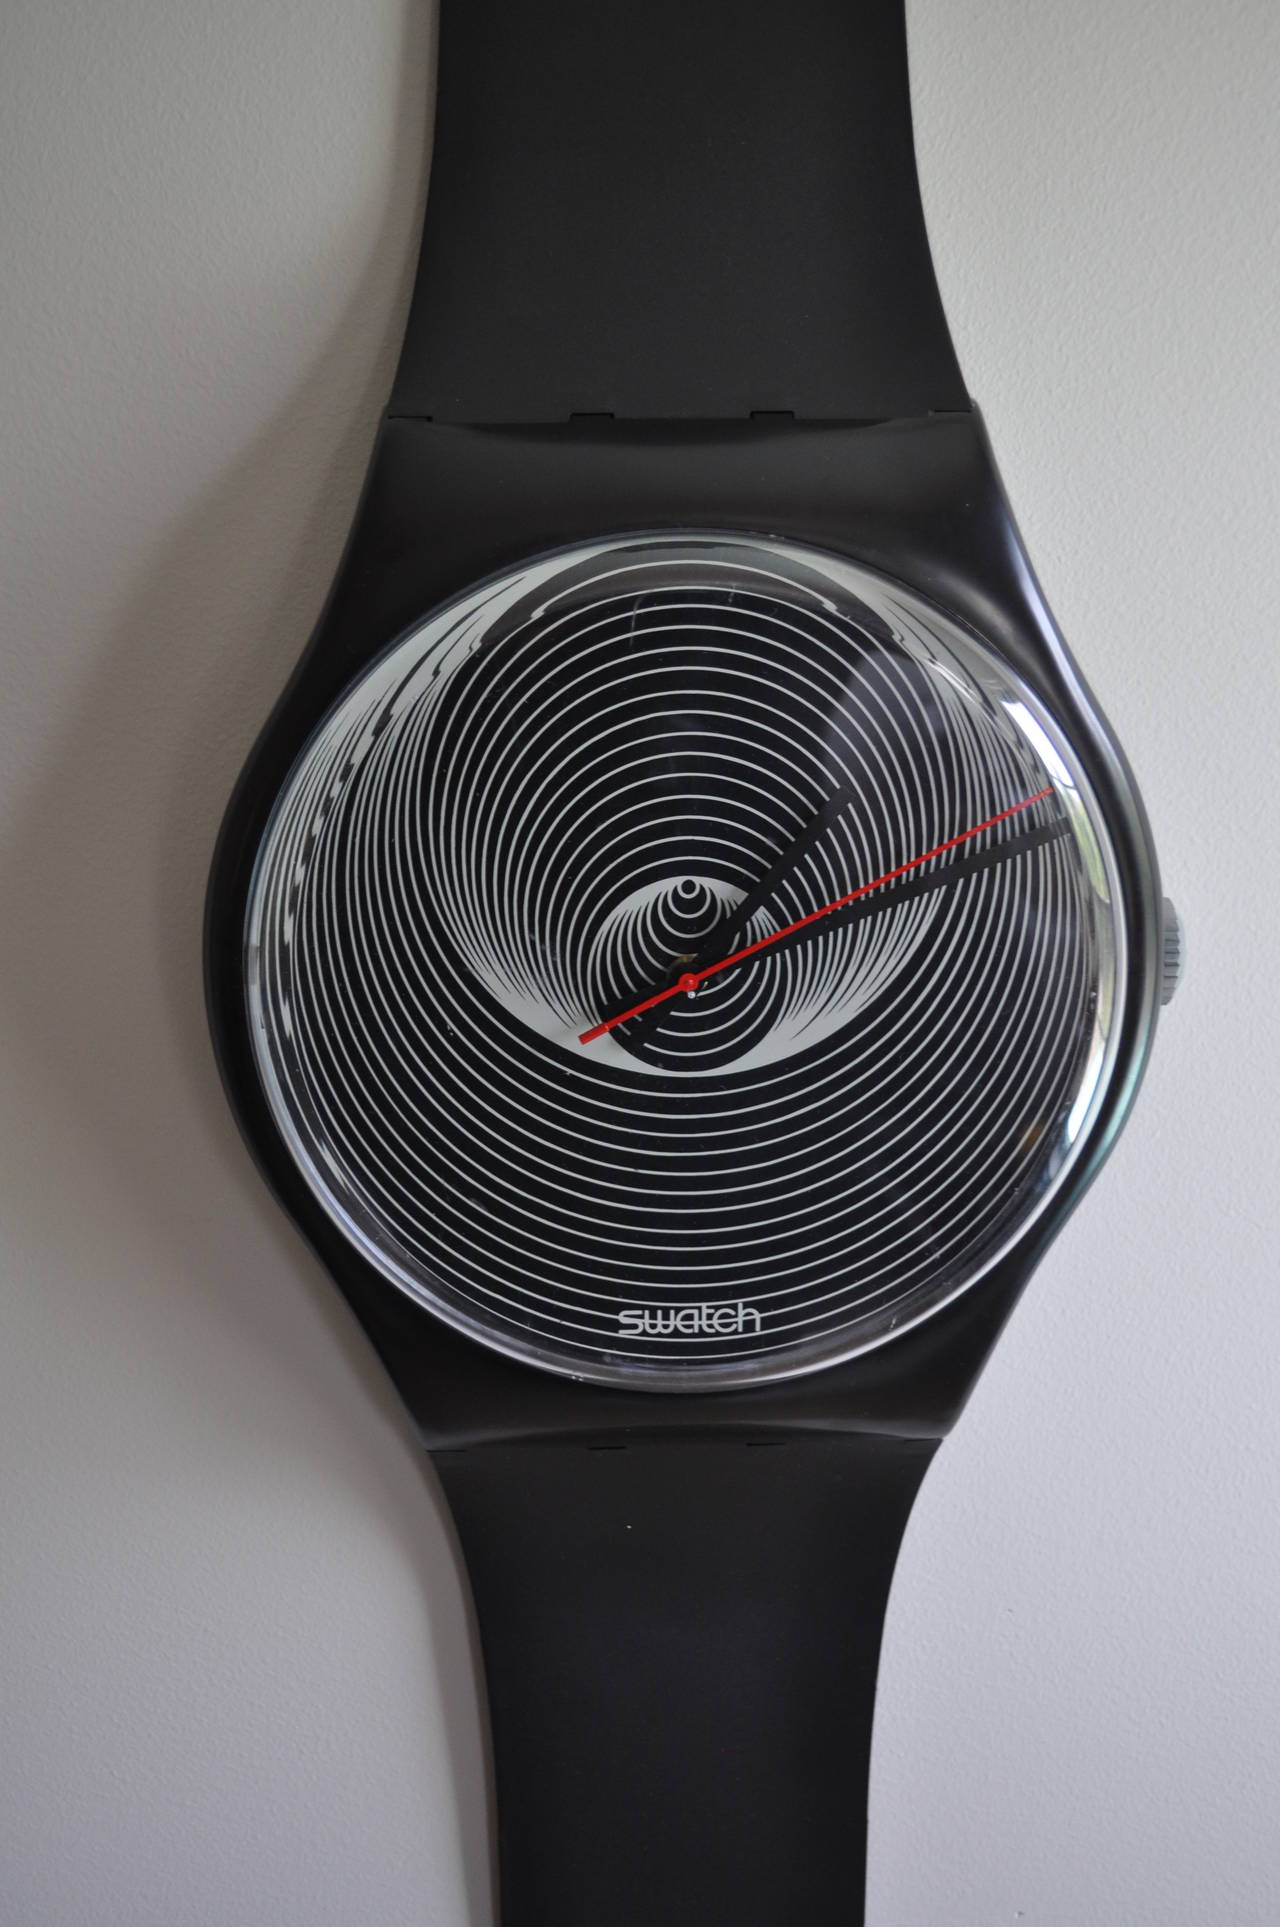 Iconic 1980's Swatch Watch Pop Art Wall Clock.  This wall mounted sculptural piece features a unique psychedelic black and white swirl face with a classy black frame and band.  Can be displayed with or without the included original clear face case. 